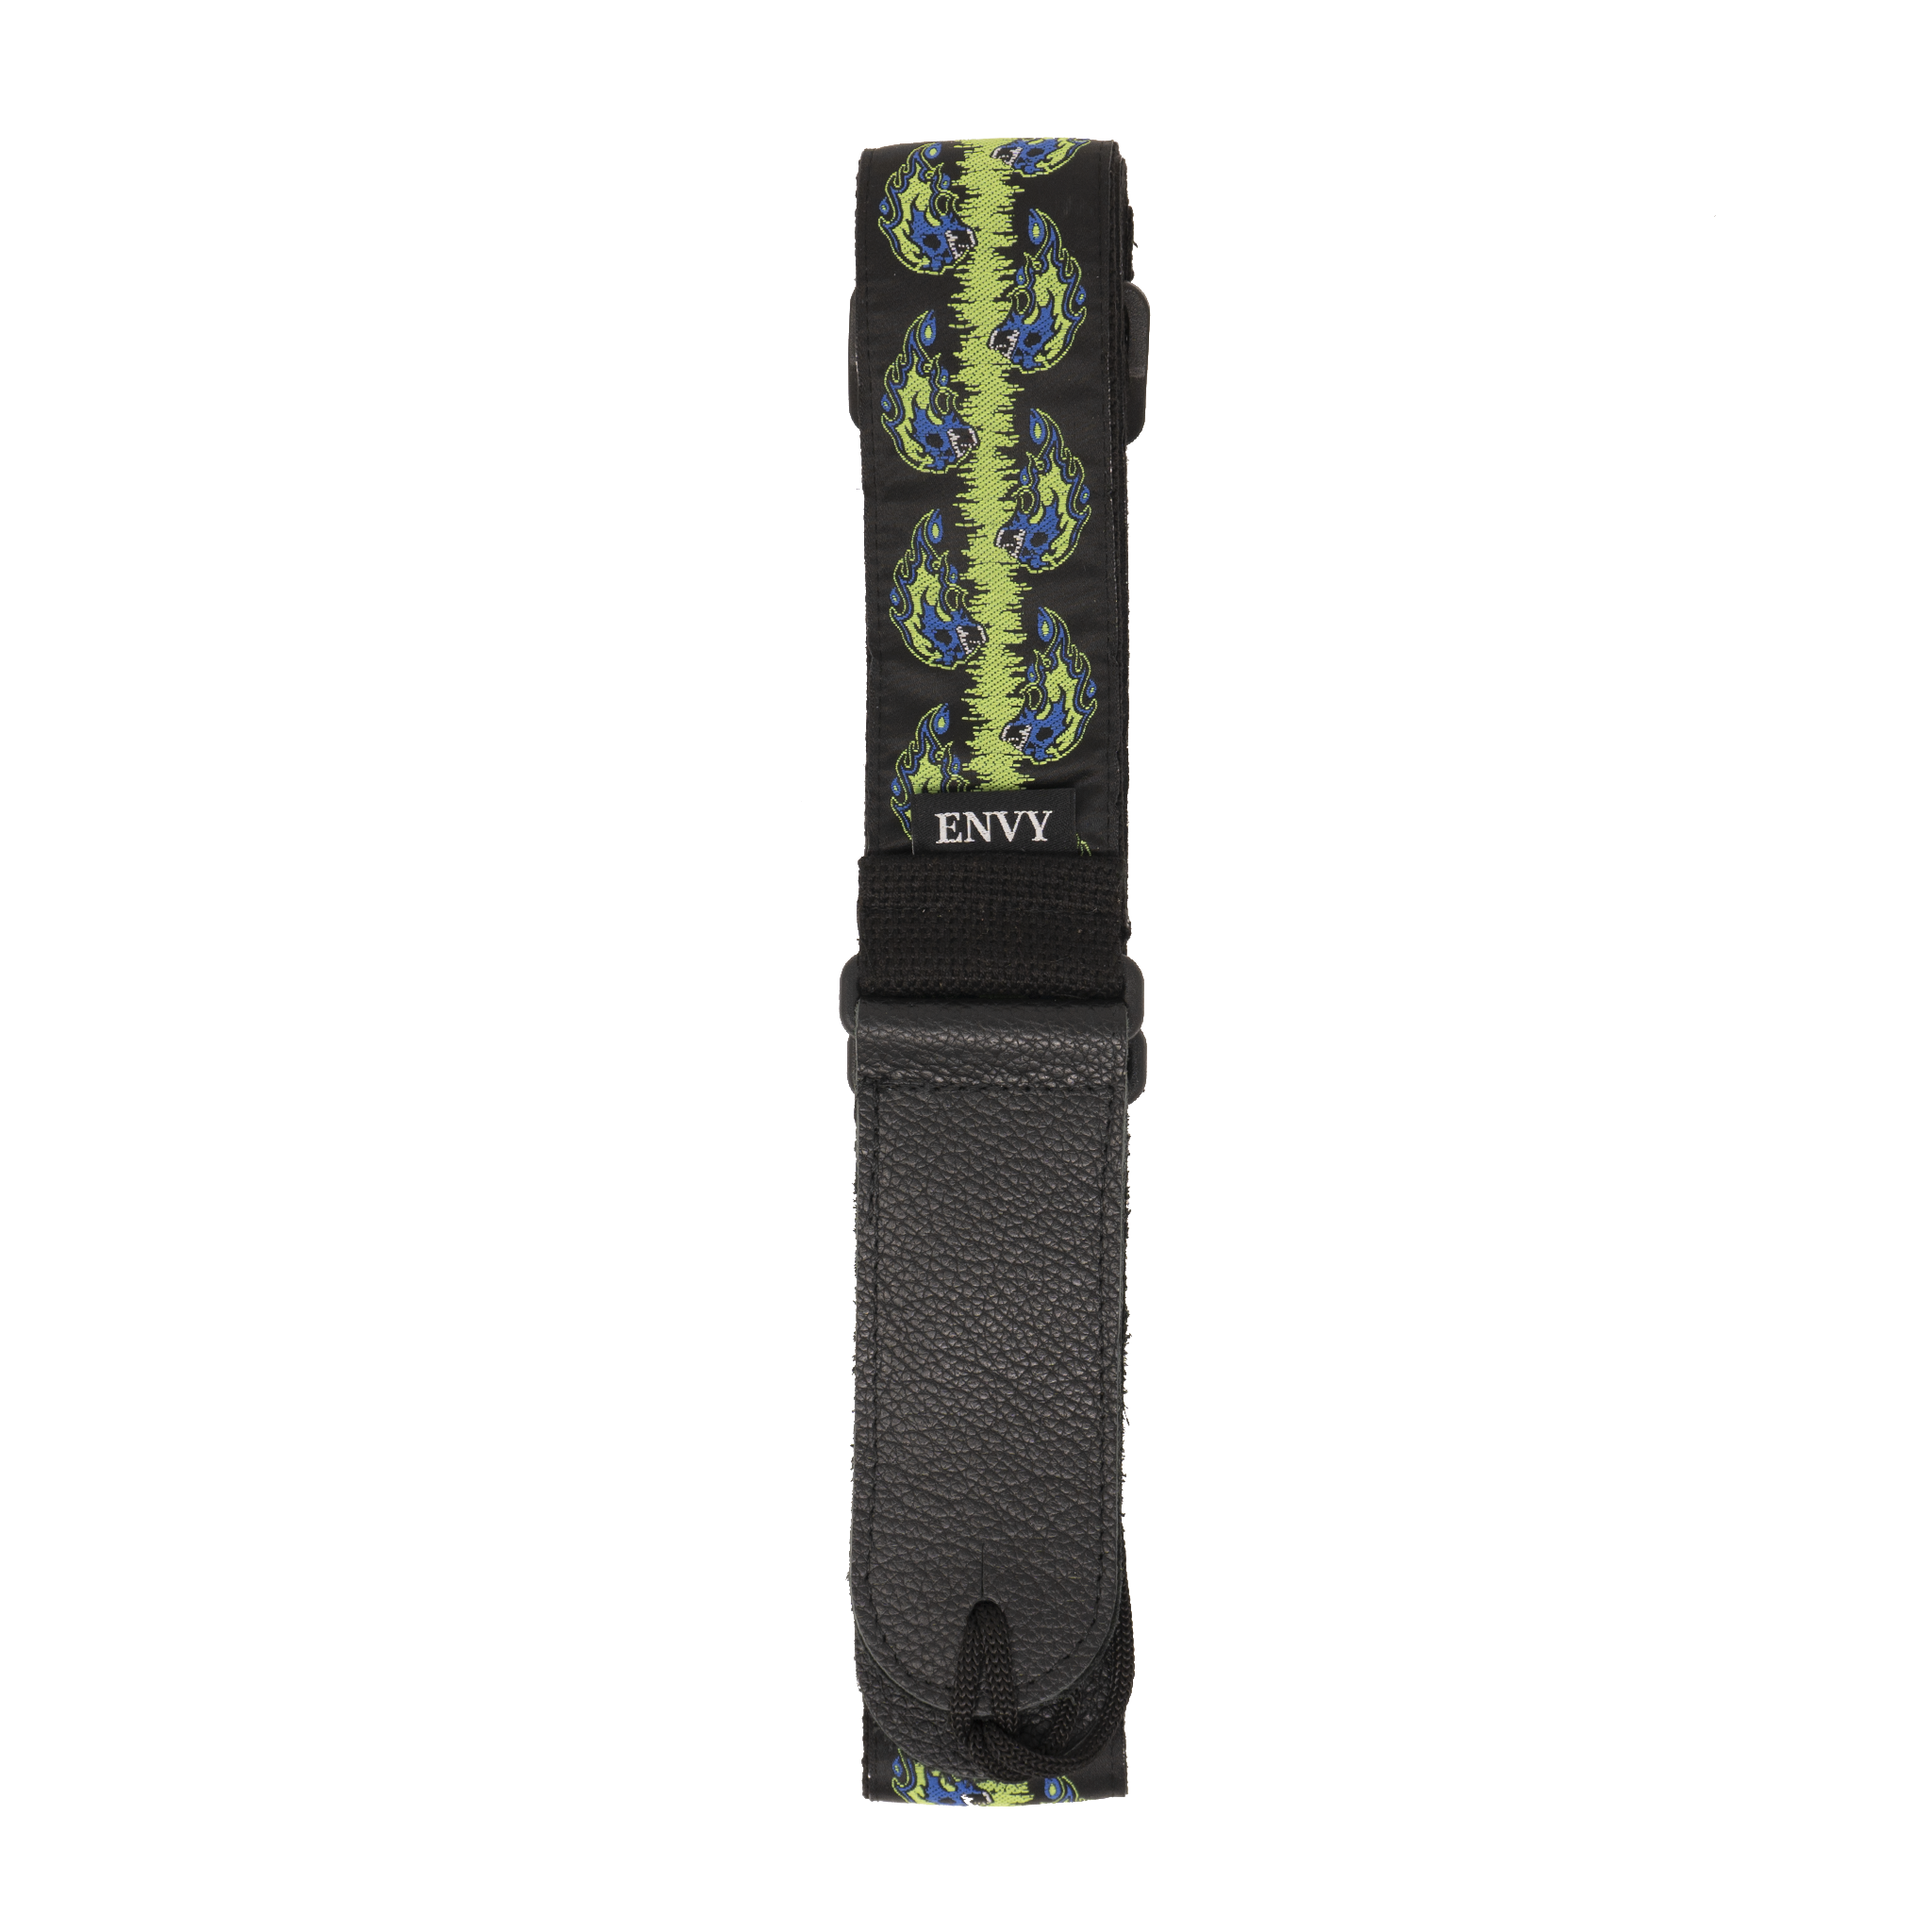 My Fave Guitar Strap in Green Flaming Skulls